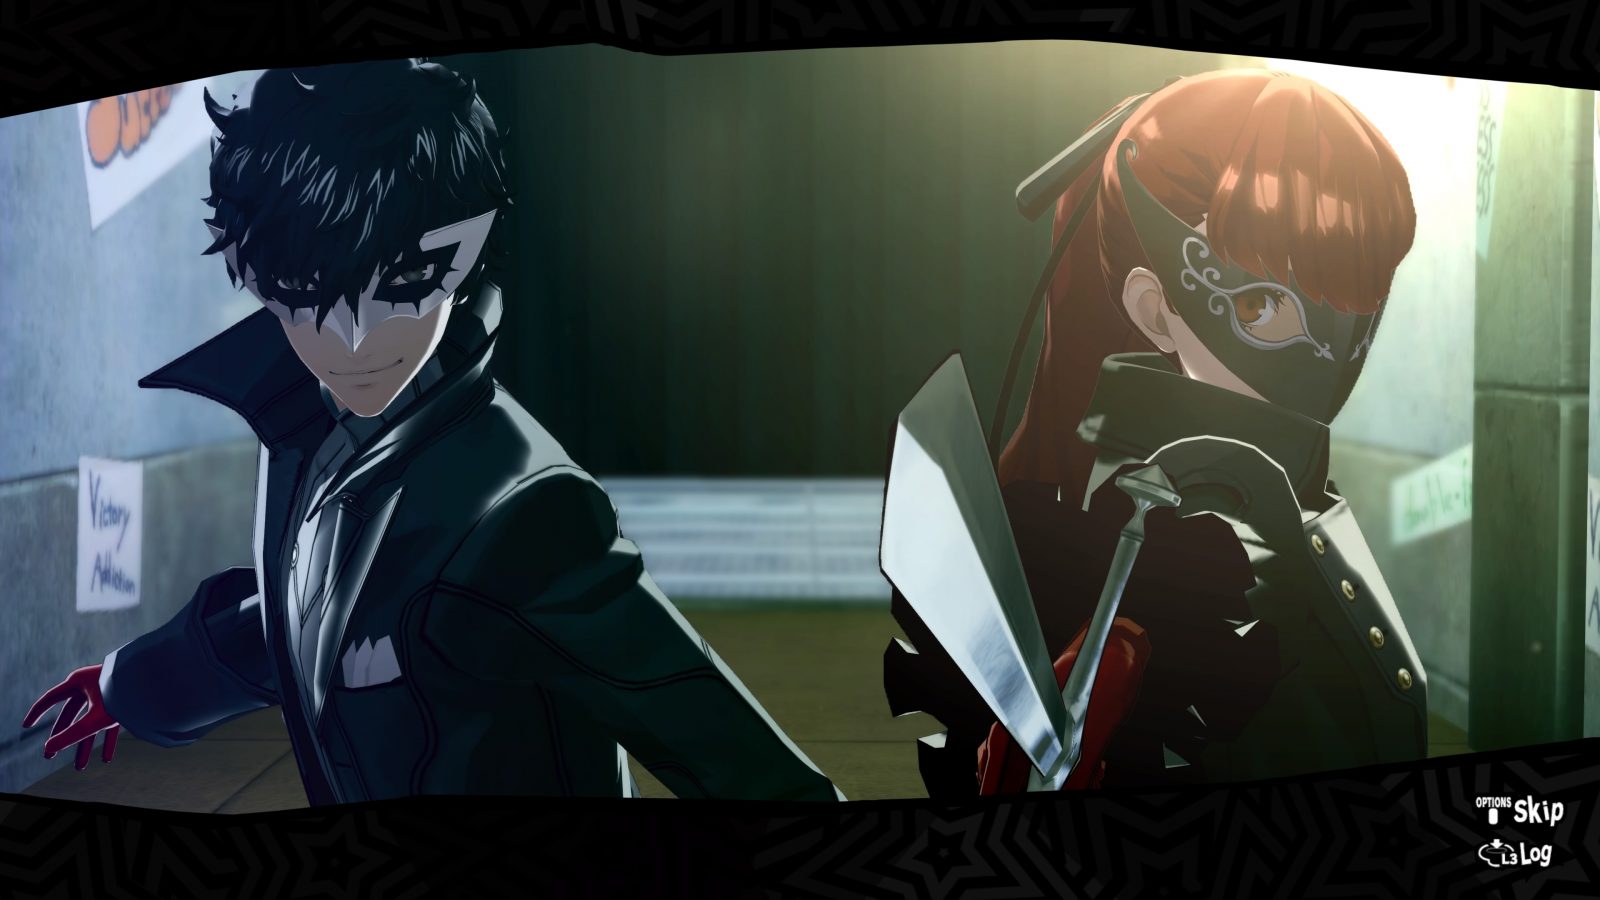 Persona 5 review: One of the best JRPGs out there, The Independent